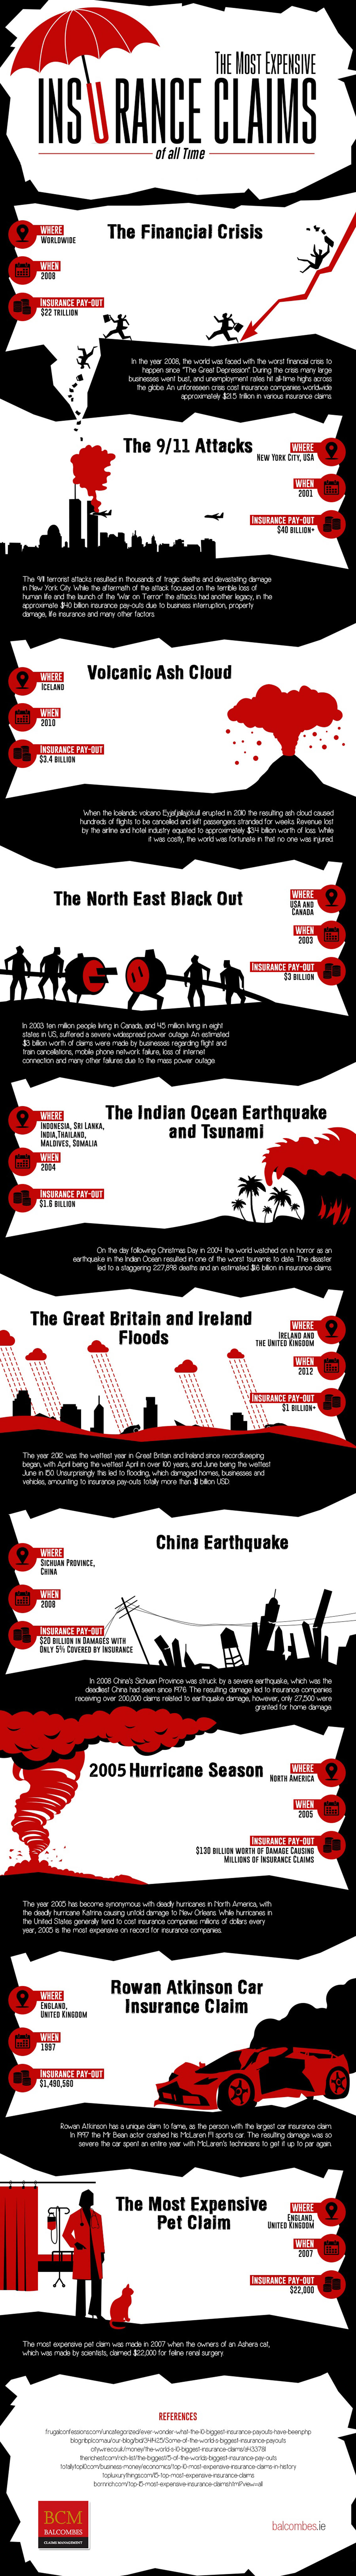 The Most Expensive Insurance Claims in the World Infographic